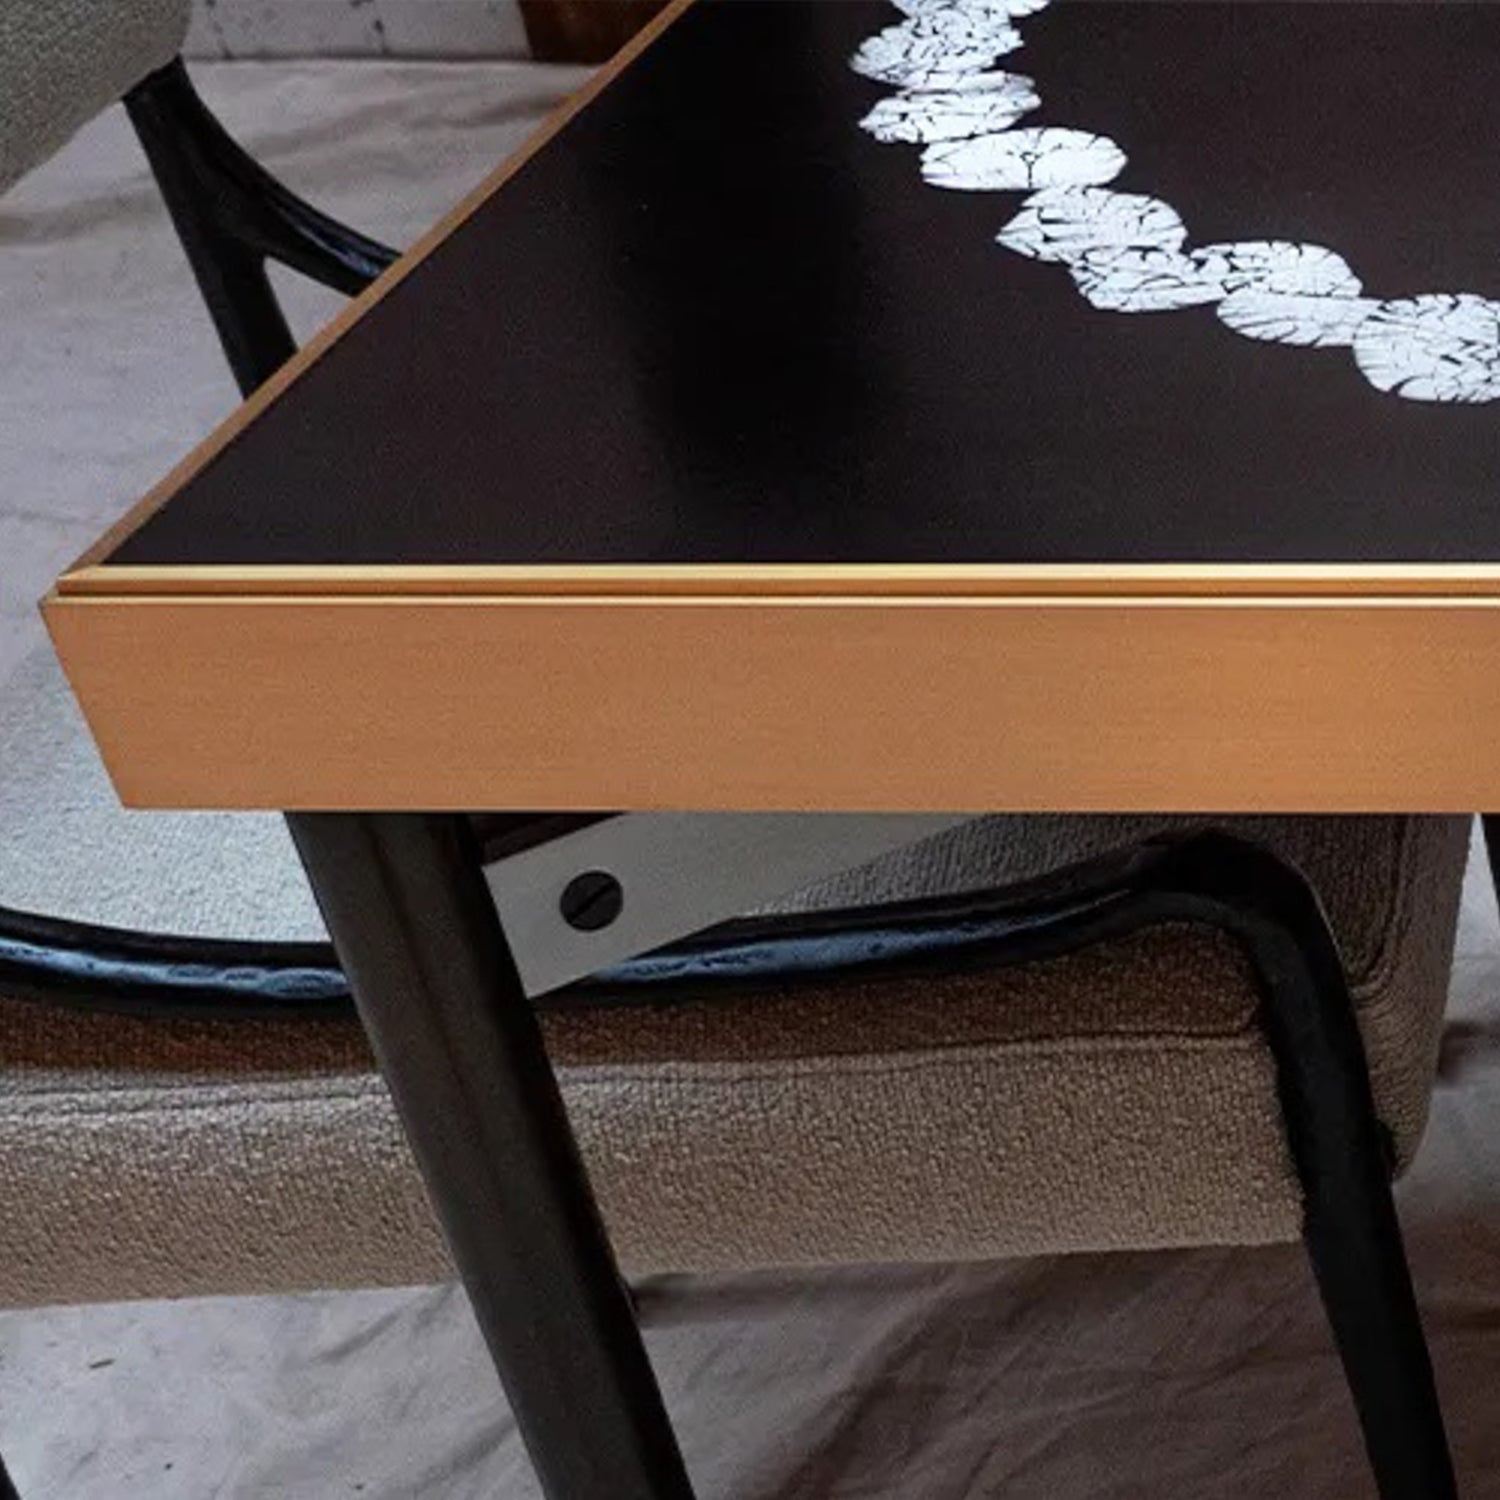 Couronne Game Table